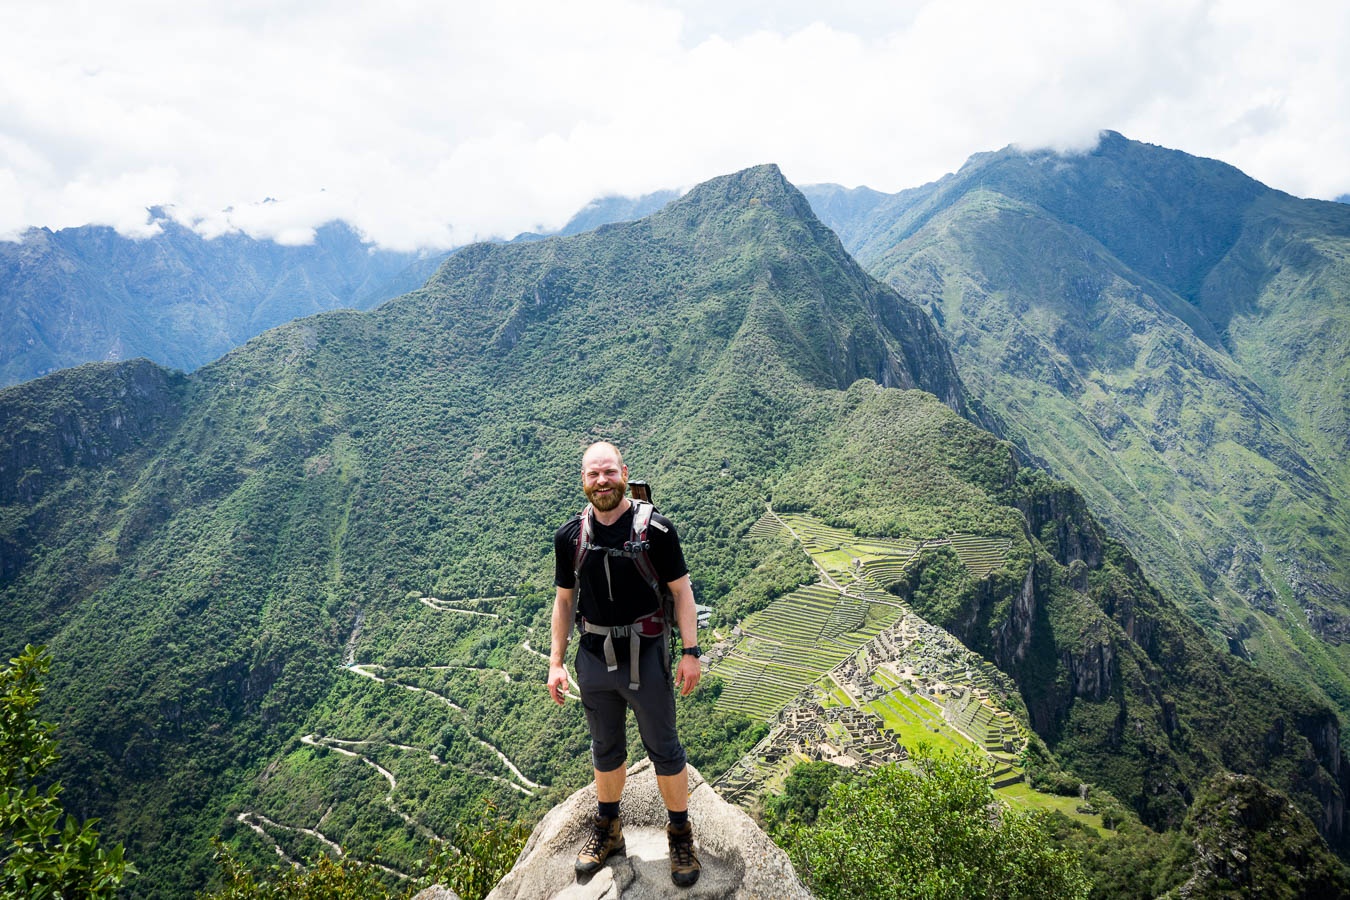 Krystof at the top of Huayna Picchu